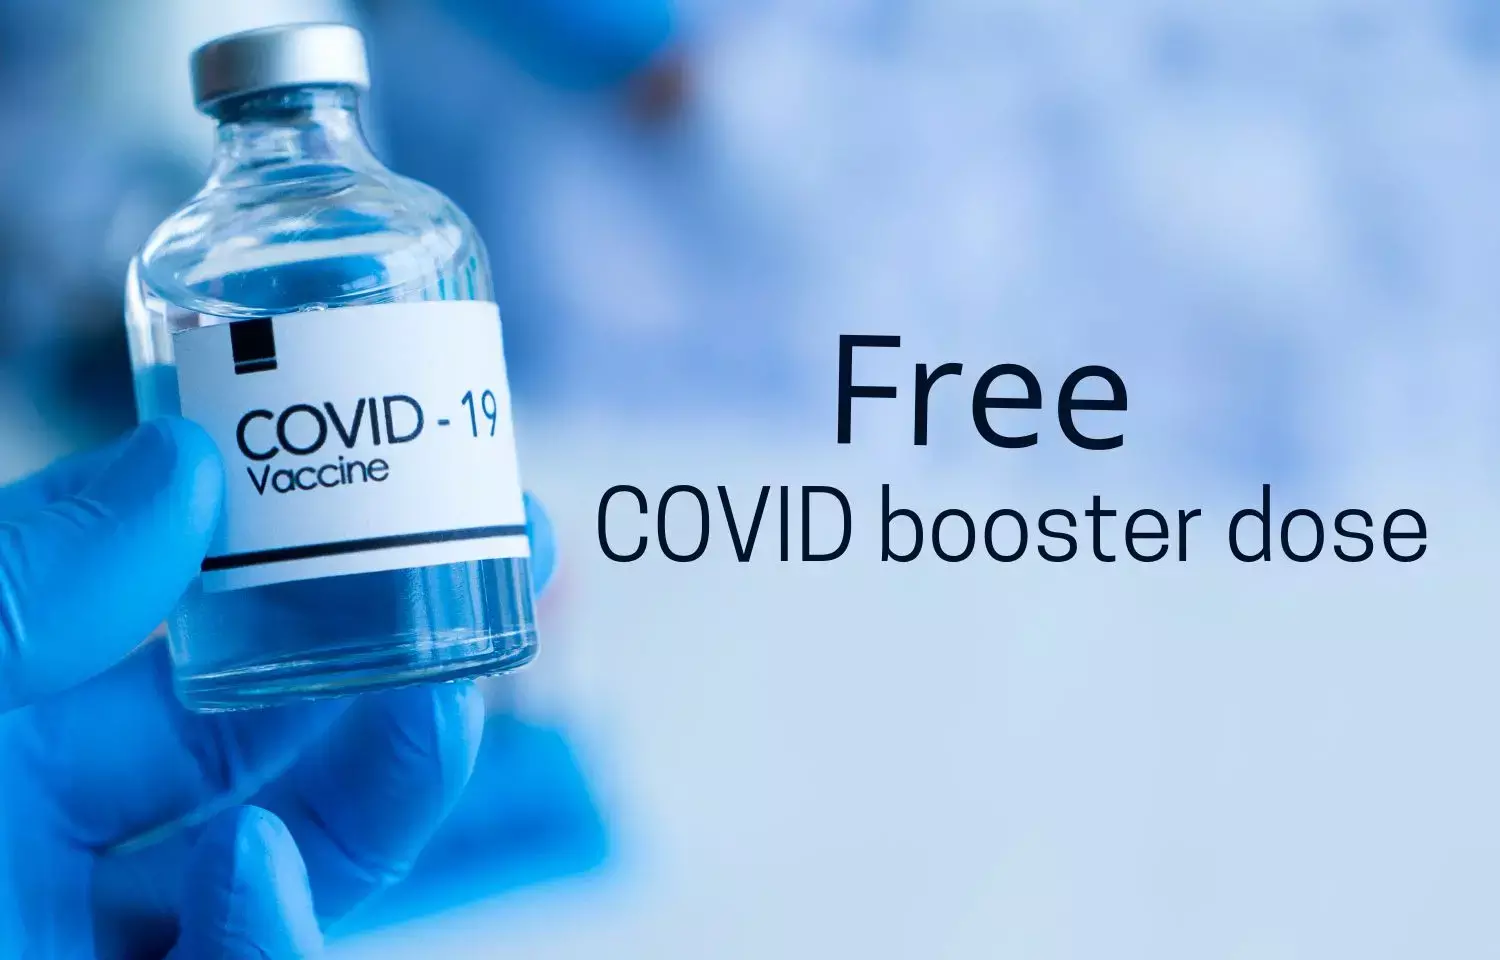 Free COVID-19 booster dose for all adults for next 75 days